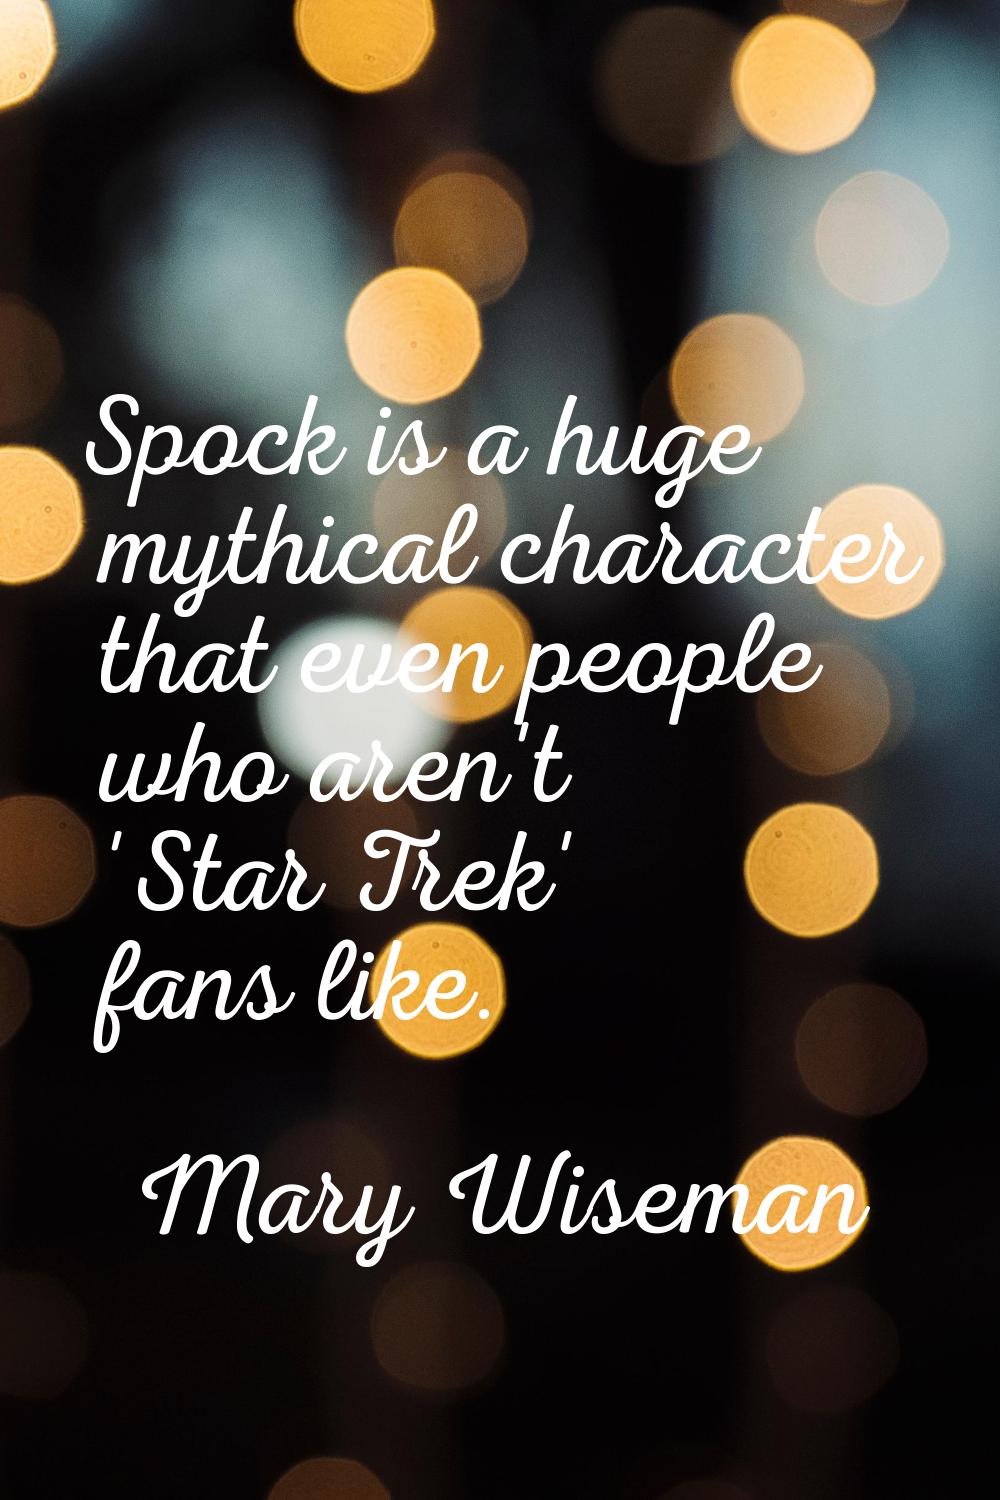 Spock is a huge mythical character that even people who aren't 'Star Trek' fans like.